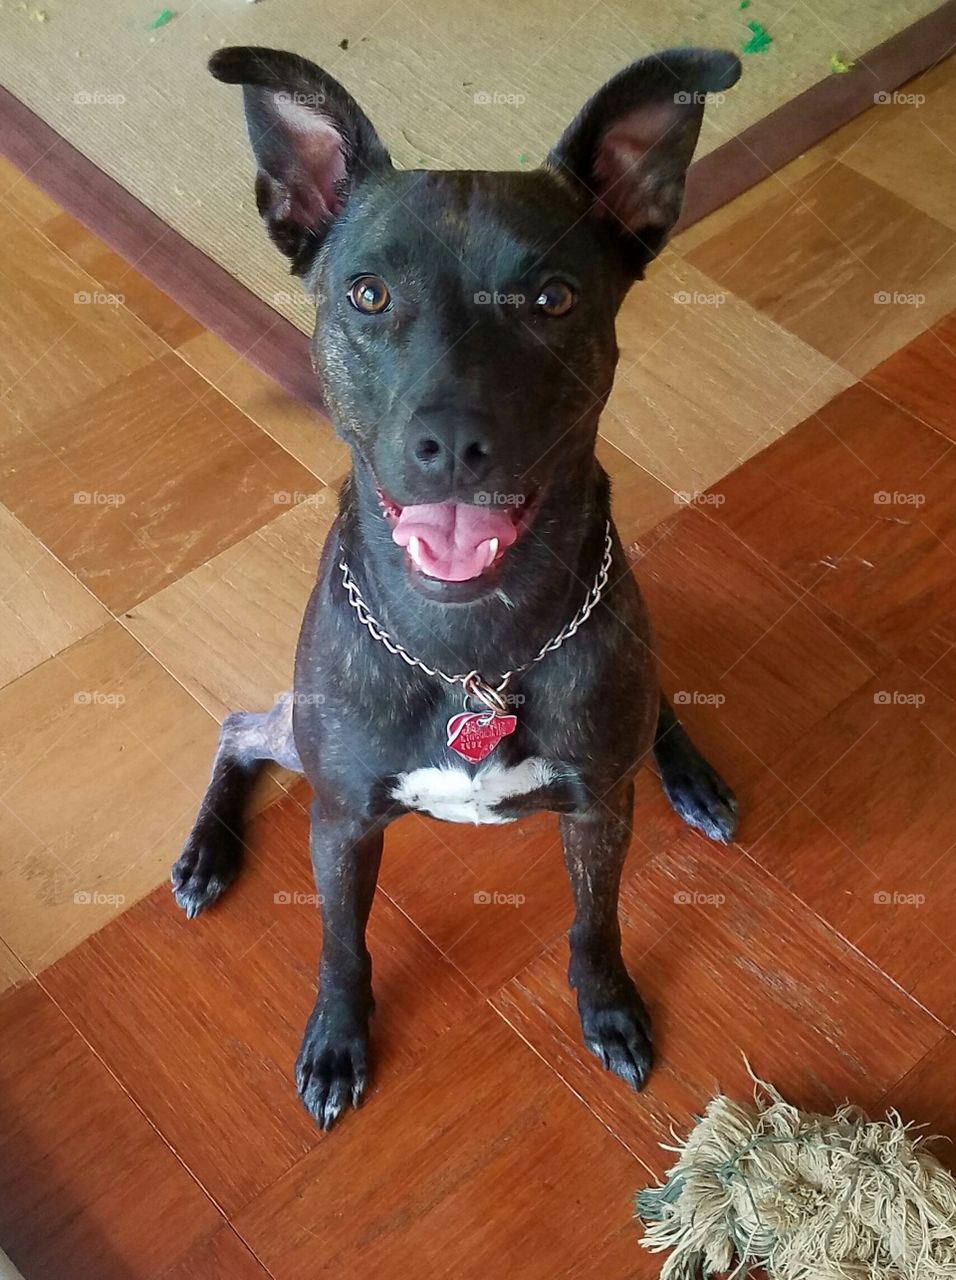 Our puppy, Rey, smiling after playing with her rope. She loves playing with her toys! Any type of toy will do, but she especially loves ropes and squeaky toys.